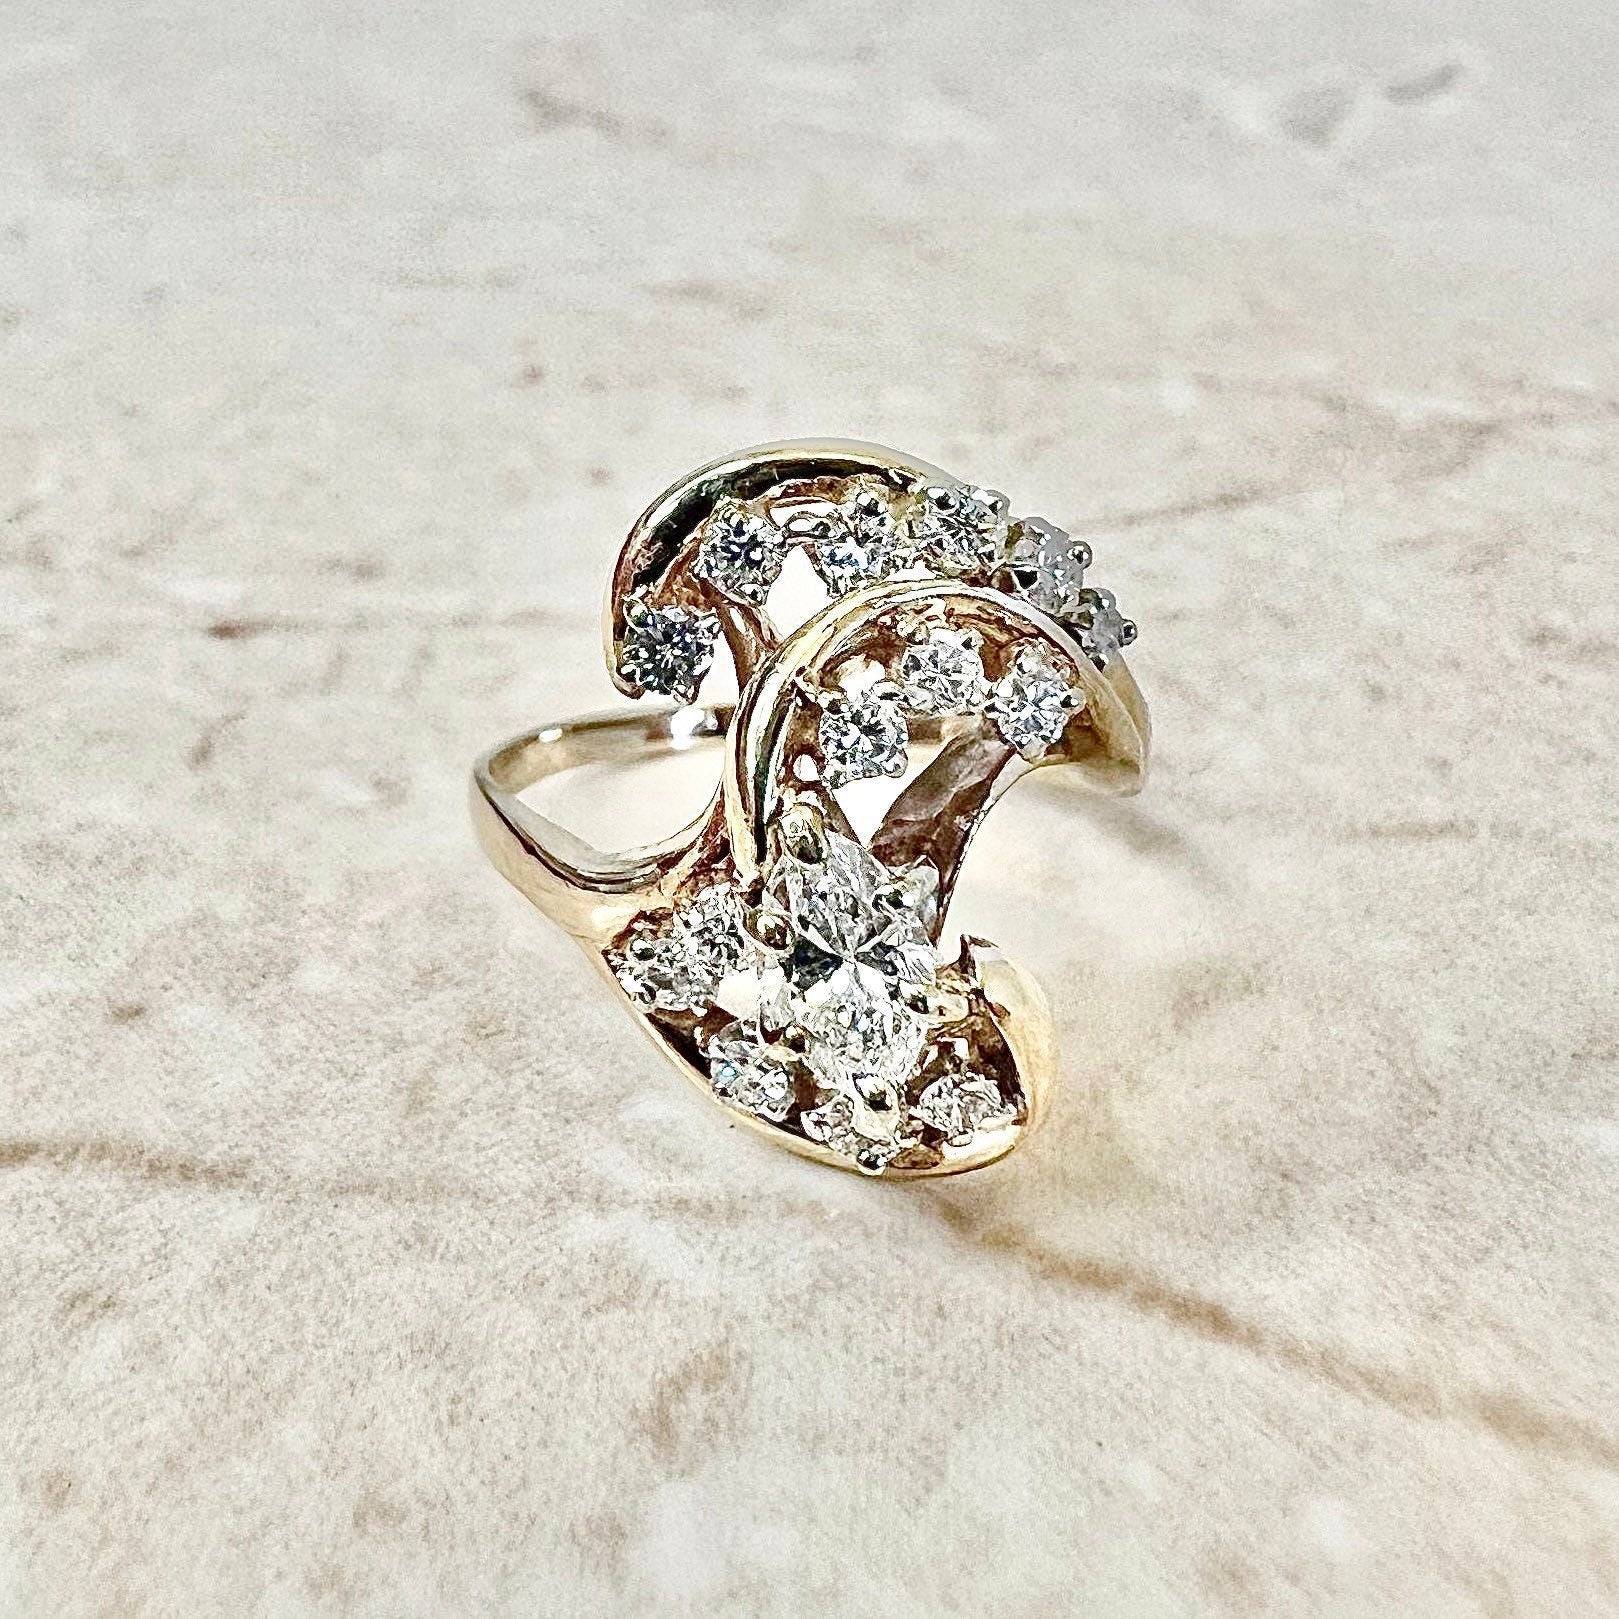 Vintage 14K Marquise Diamond Cocktail Ring - Yellow Gold Promise Ring - Cocktail Ring - Engagement Ring - Birthday Gift - Best Gift For Her